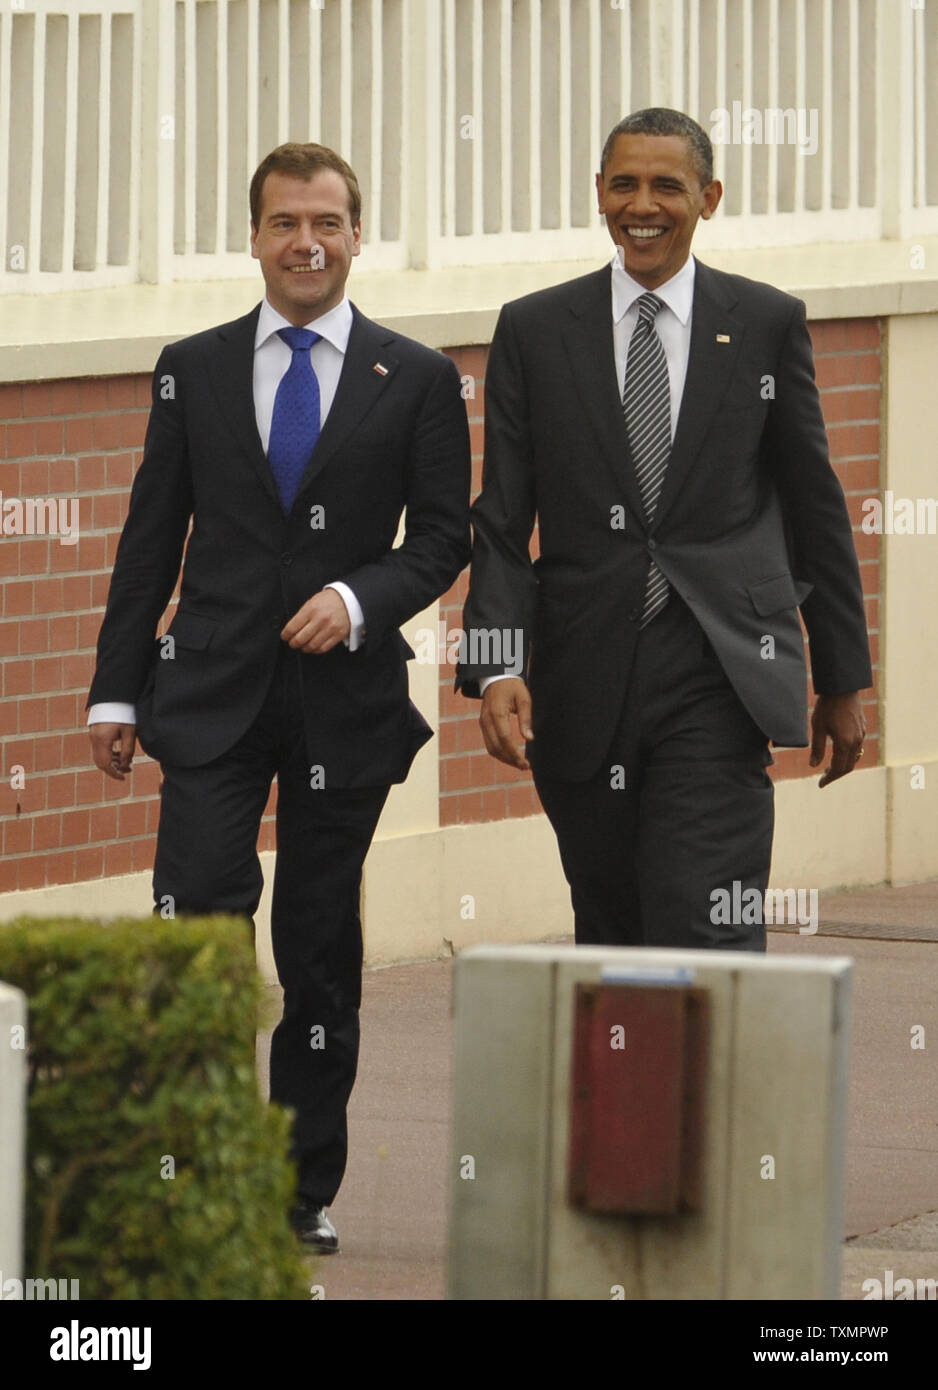 U.S. President Barack Obama (R) walks with Russian President Dmitry Medvedev as they arrive at the G8 Summit in Deauville, France, on May 26, 2011. UPI Stock Photo